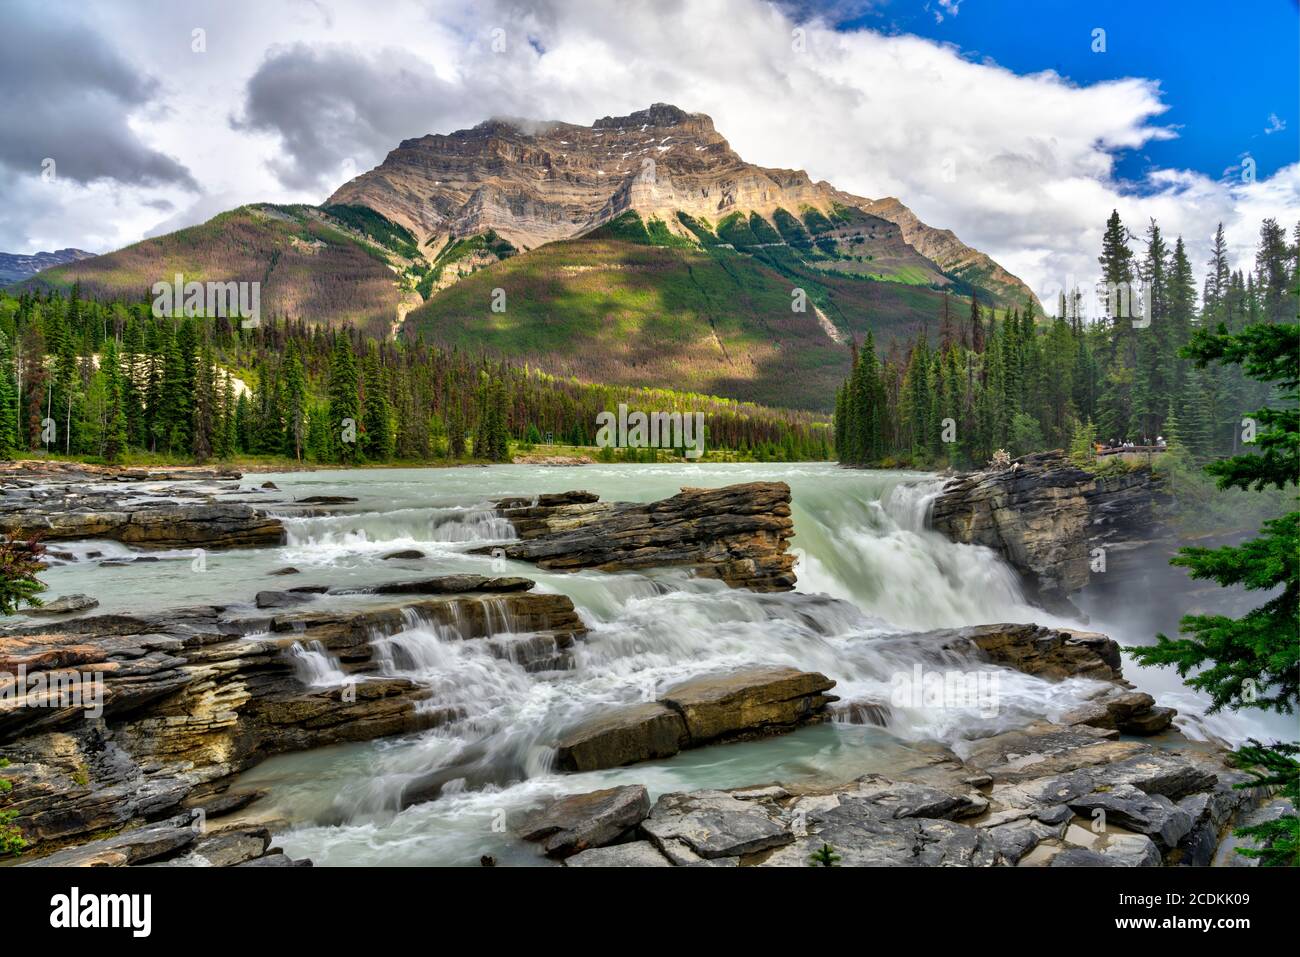 Le cascate Athabasca, Icefields Parkway, Jasper National Park, Alberta, Canada. Foto Stock